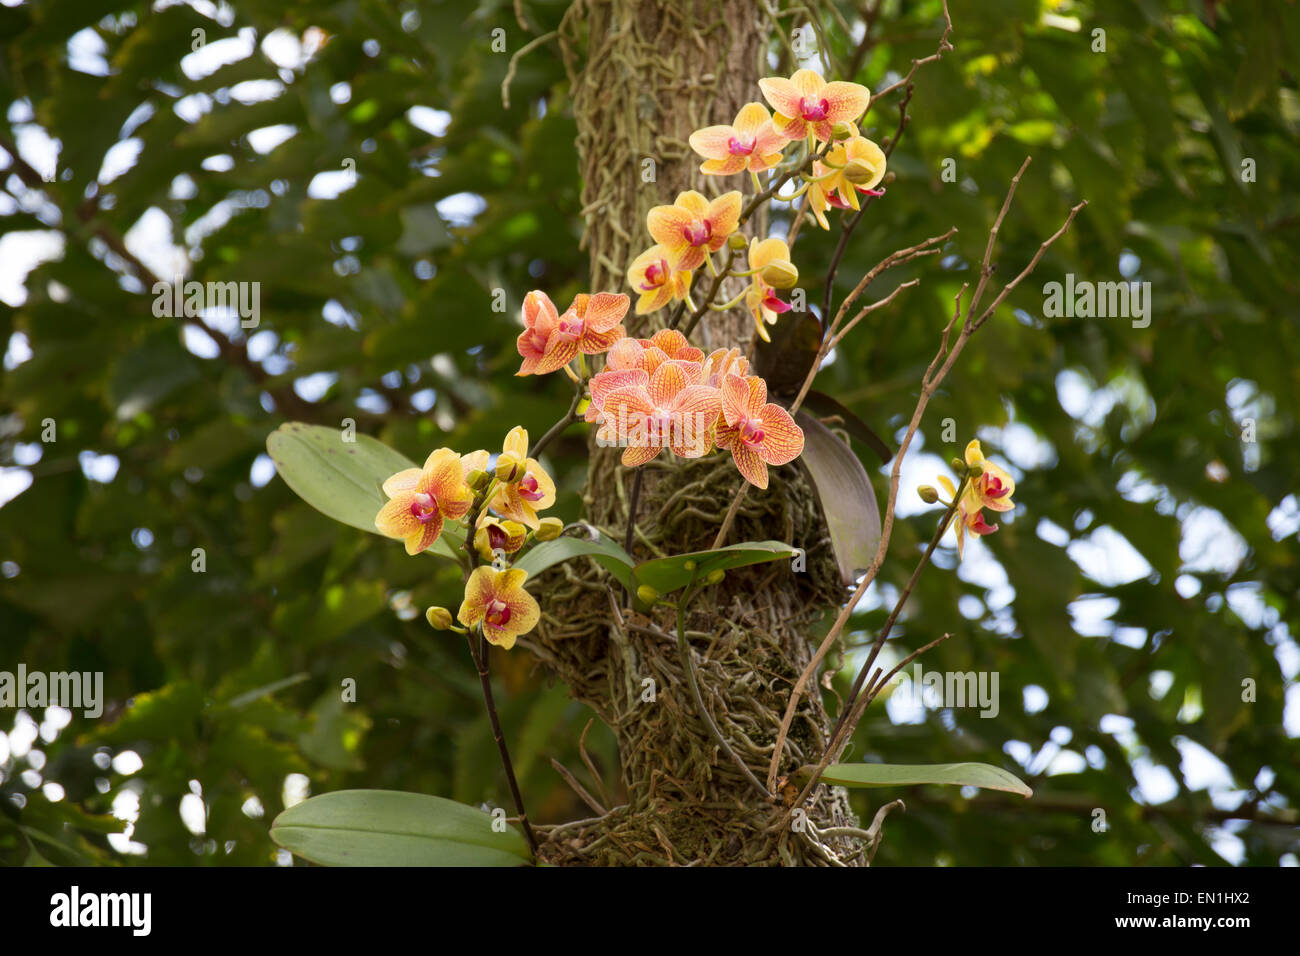 Phalaenopsis orchids on a tree Stock Photo